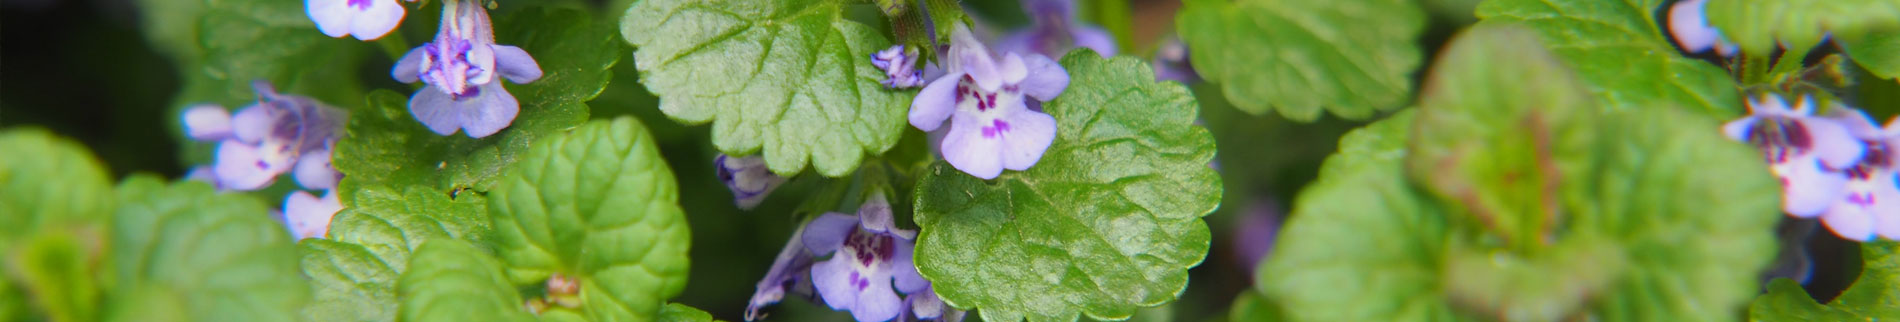 image of ground ivy - green leaves with small purple flowers